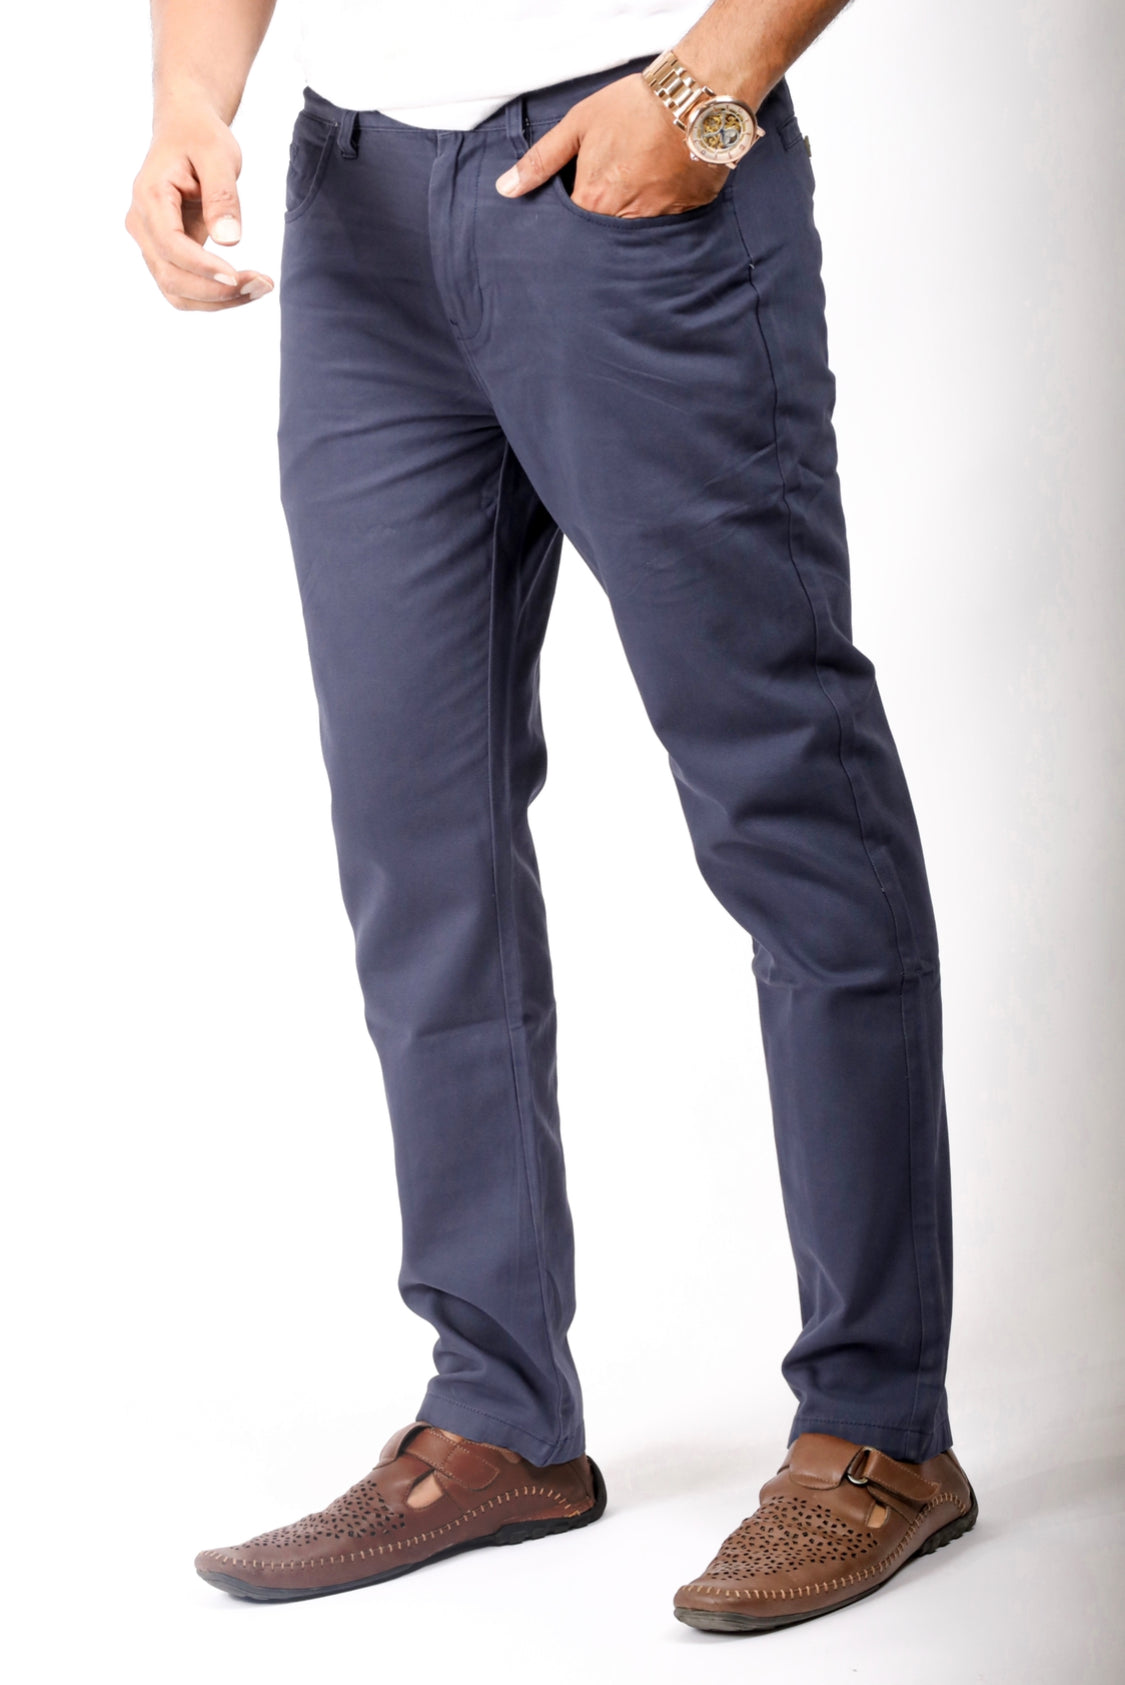 Trousers/ Pants- suede blue